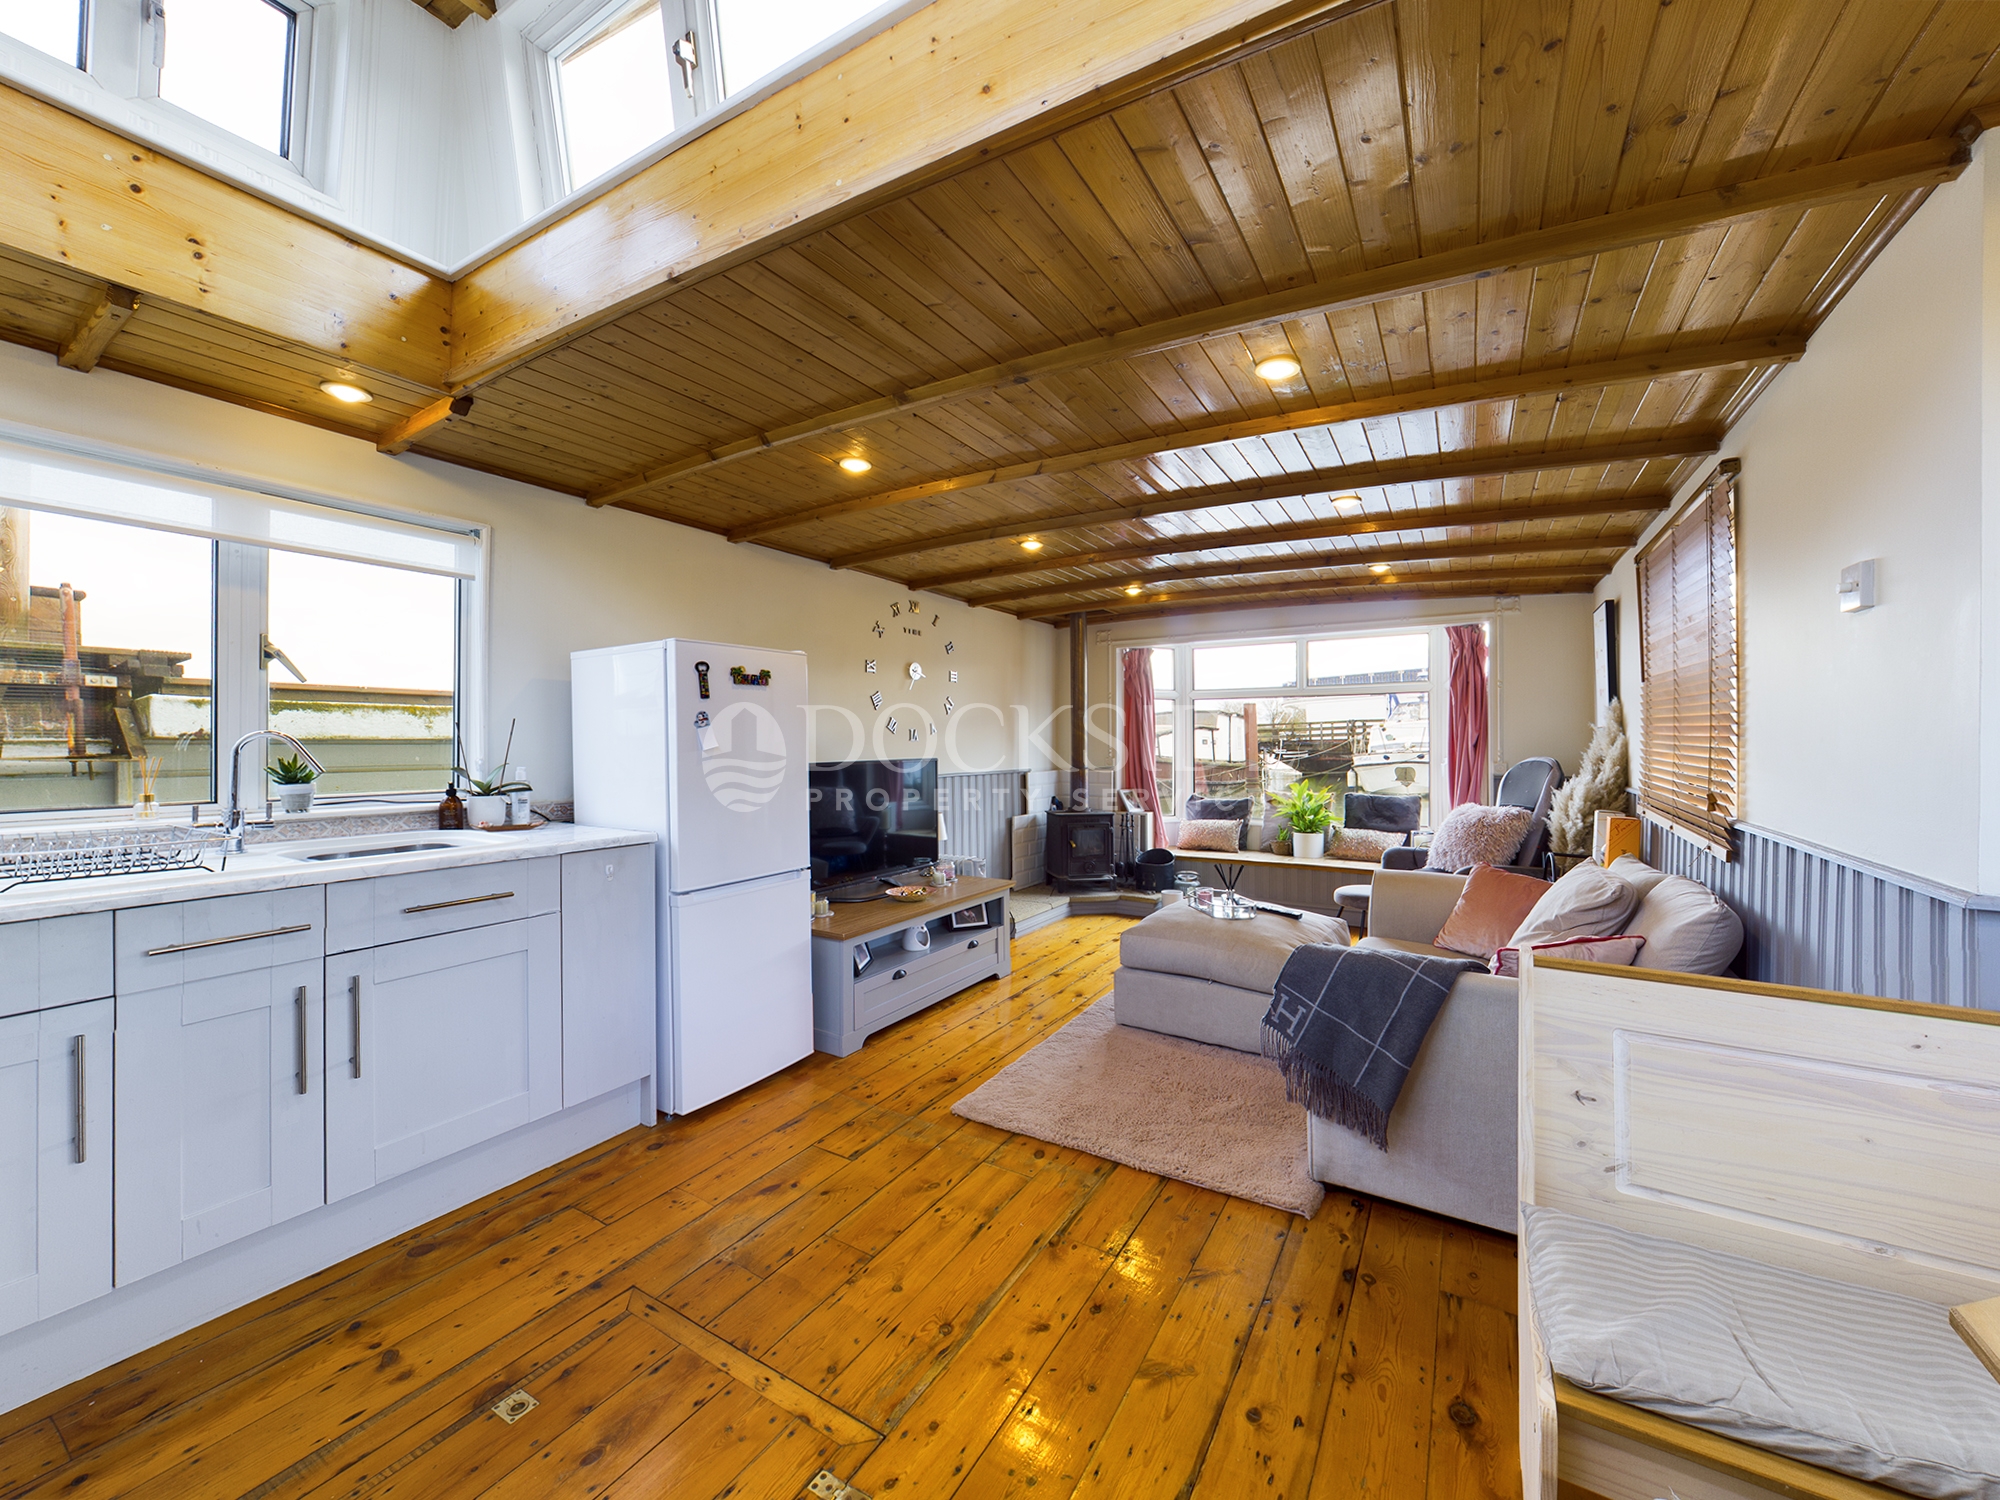 1 bed house boat for sale - Property Image 1